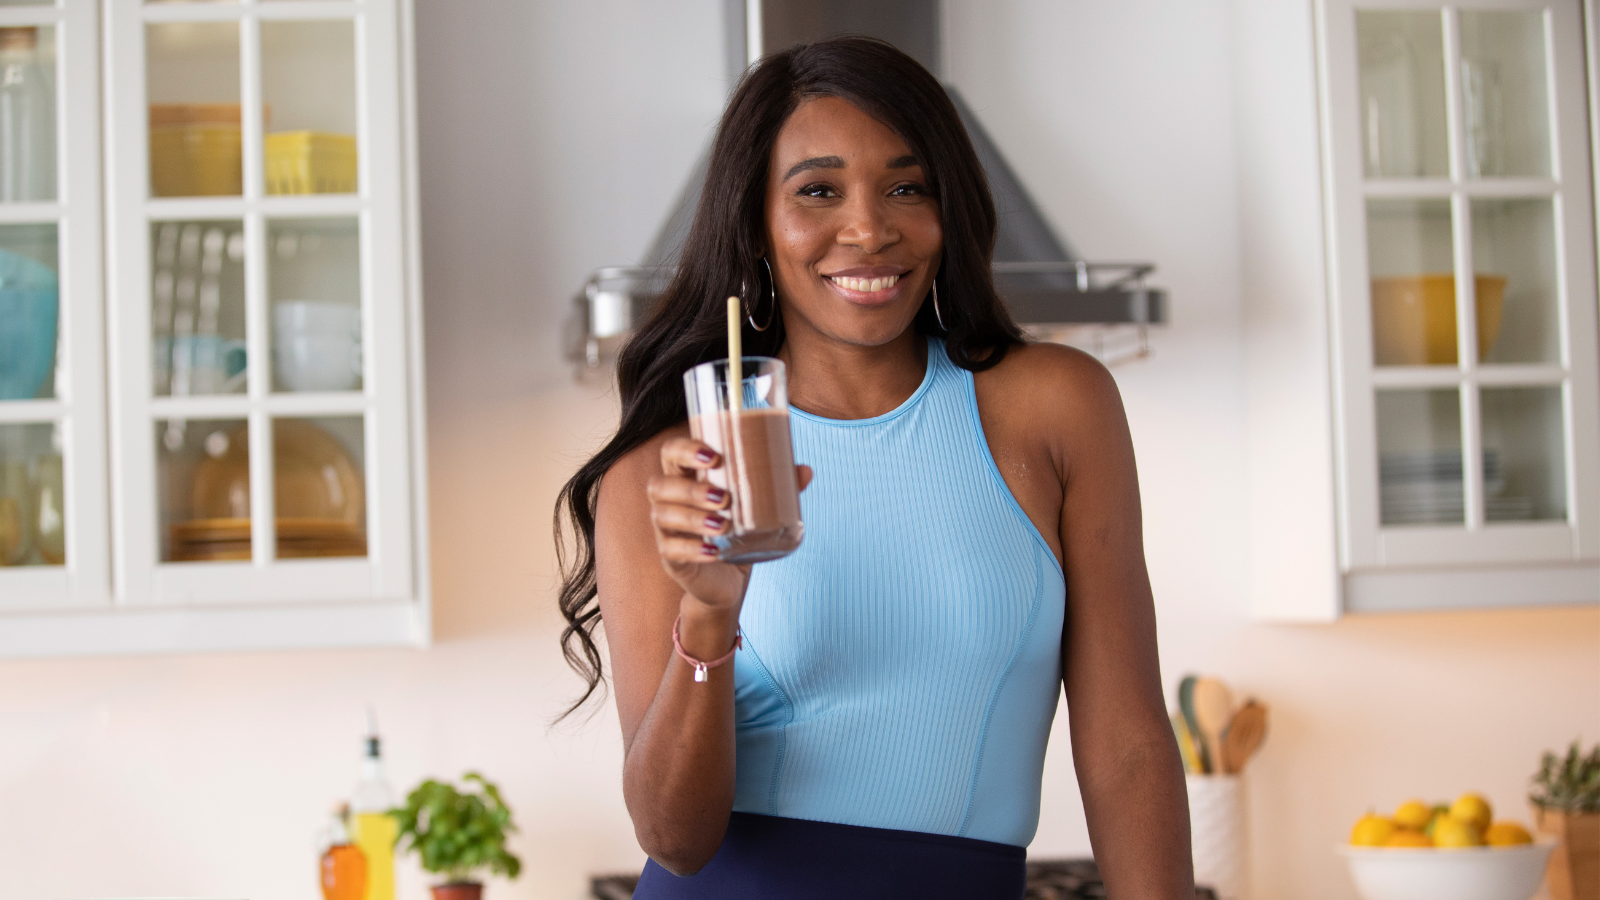 Venus Williams posing with Happy Viking smoothie in hand